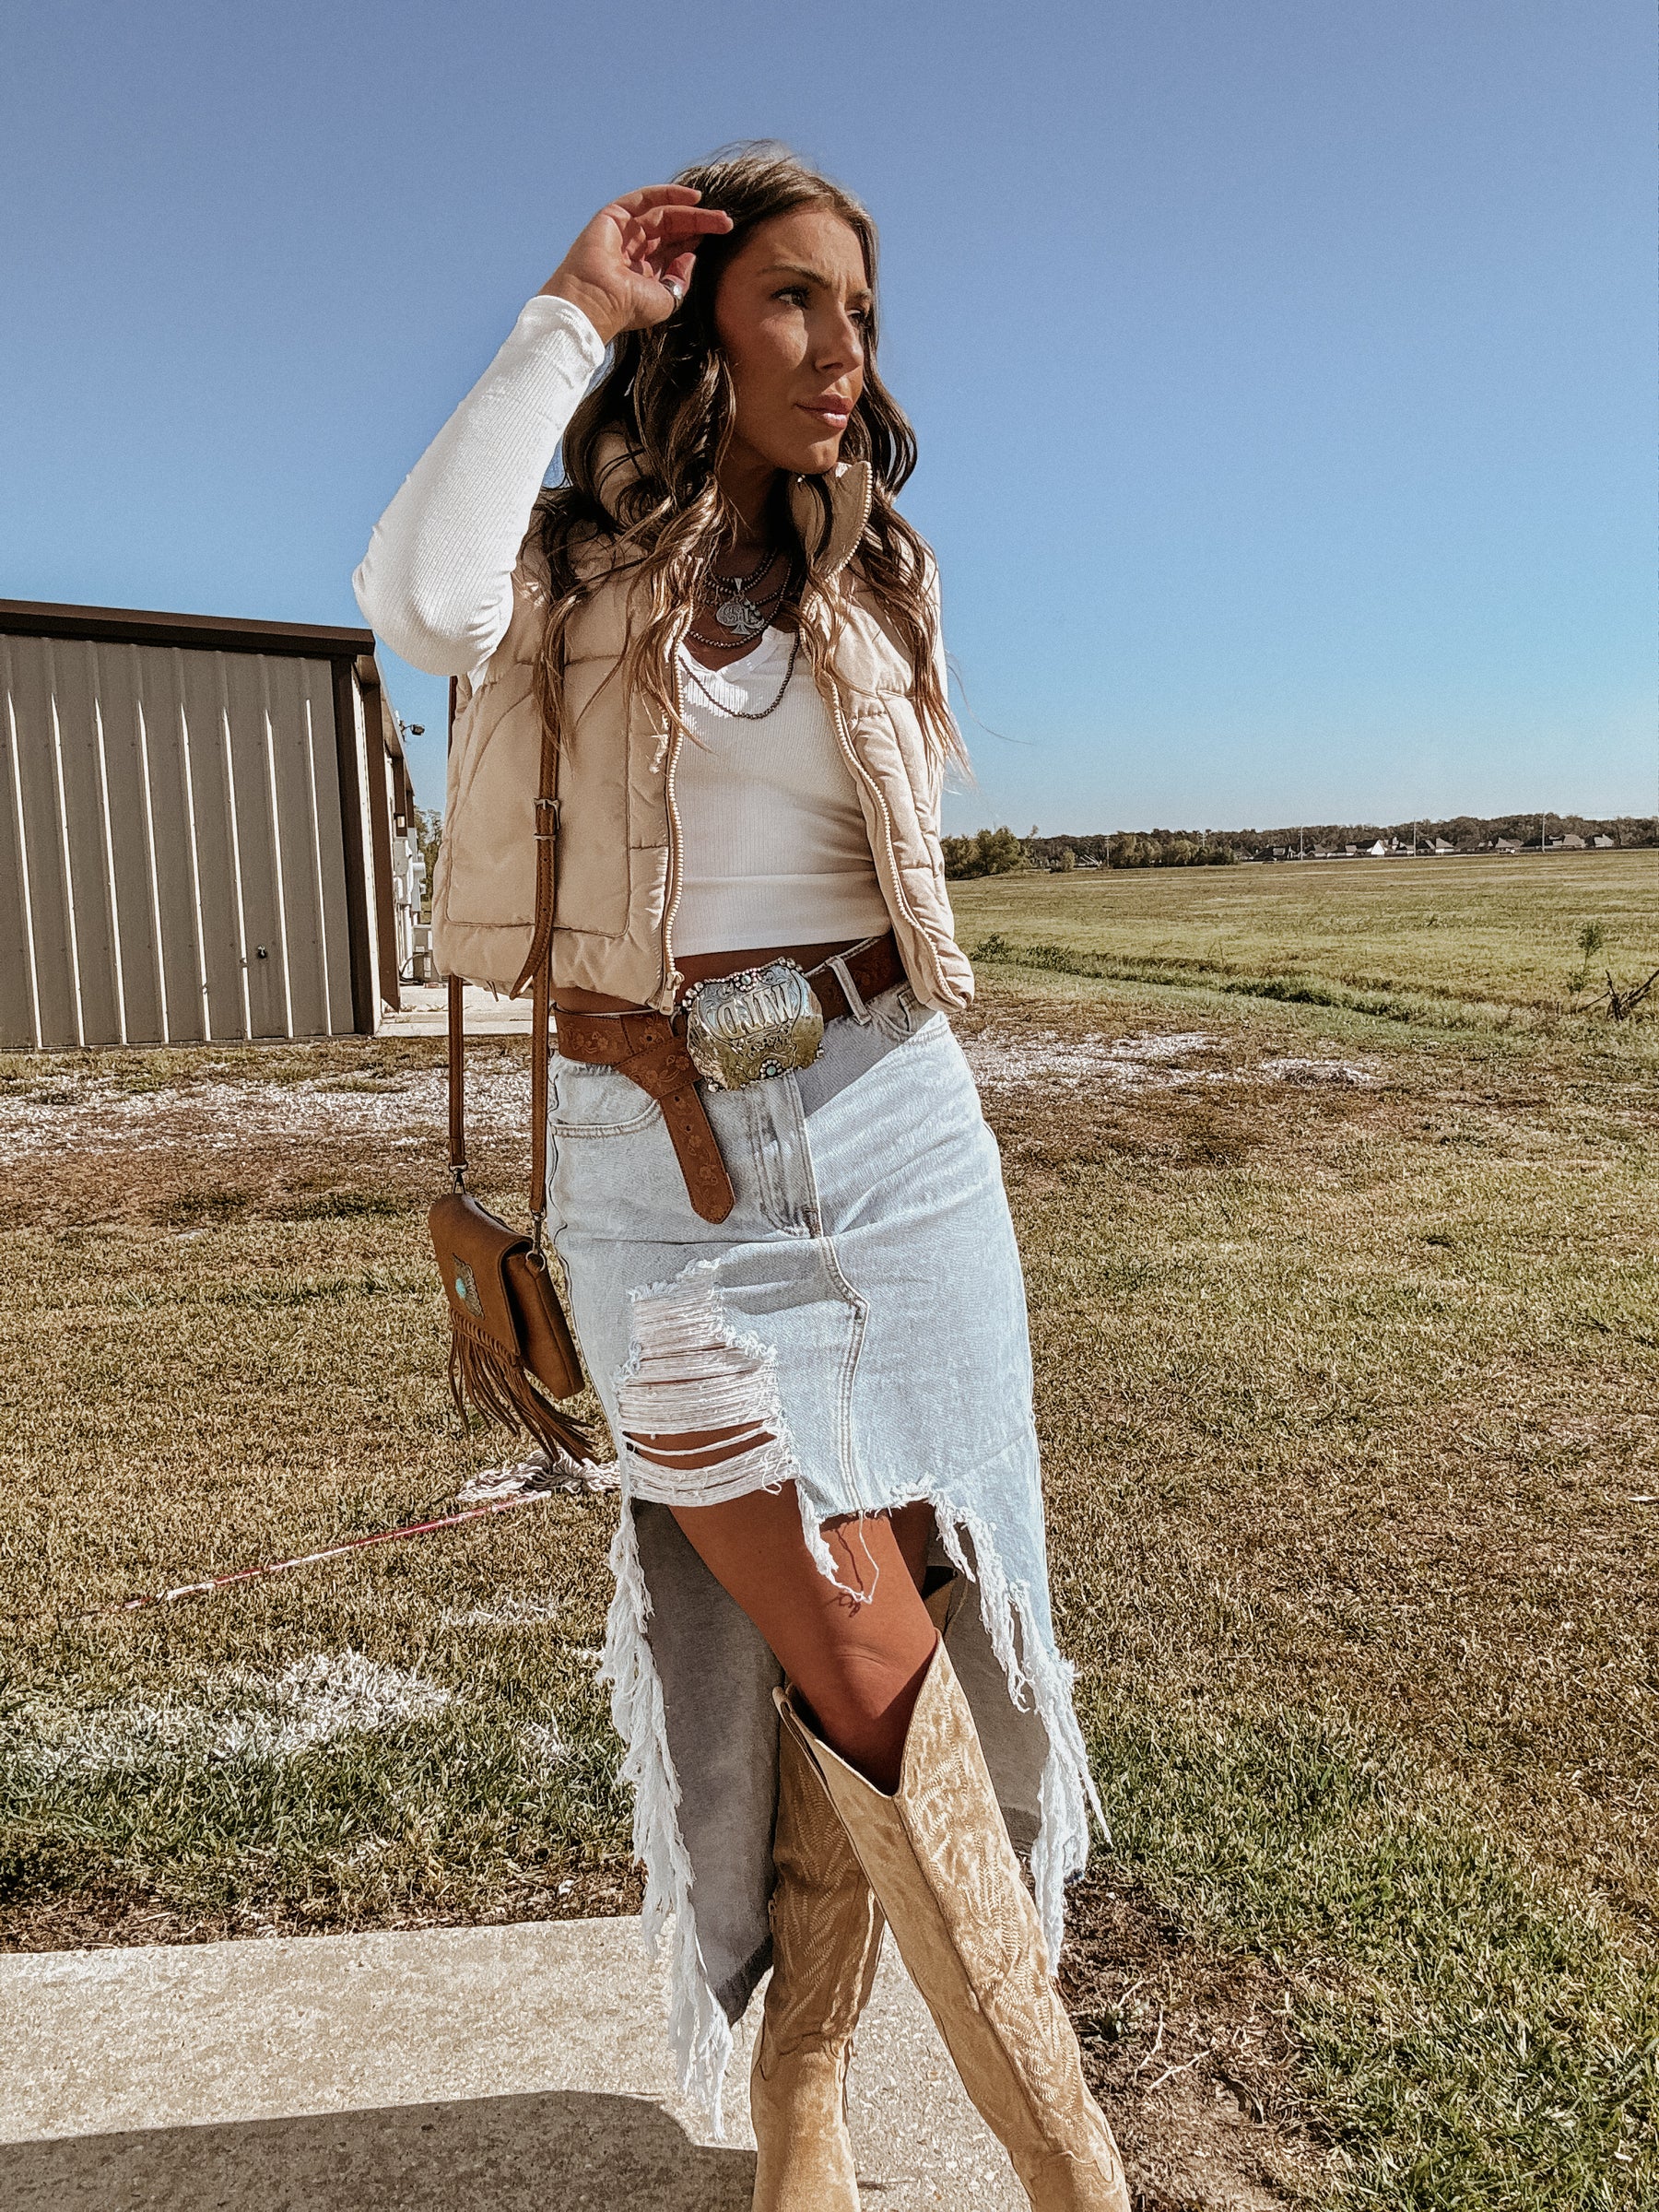 The Wild J Boutique LLC - Western With a Wild Side!